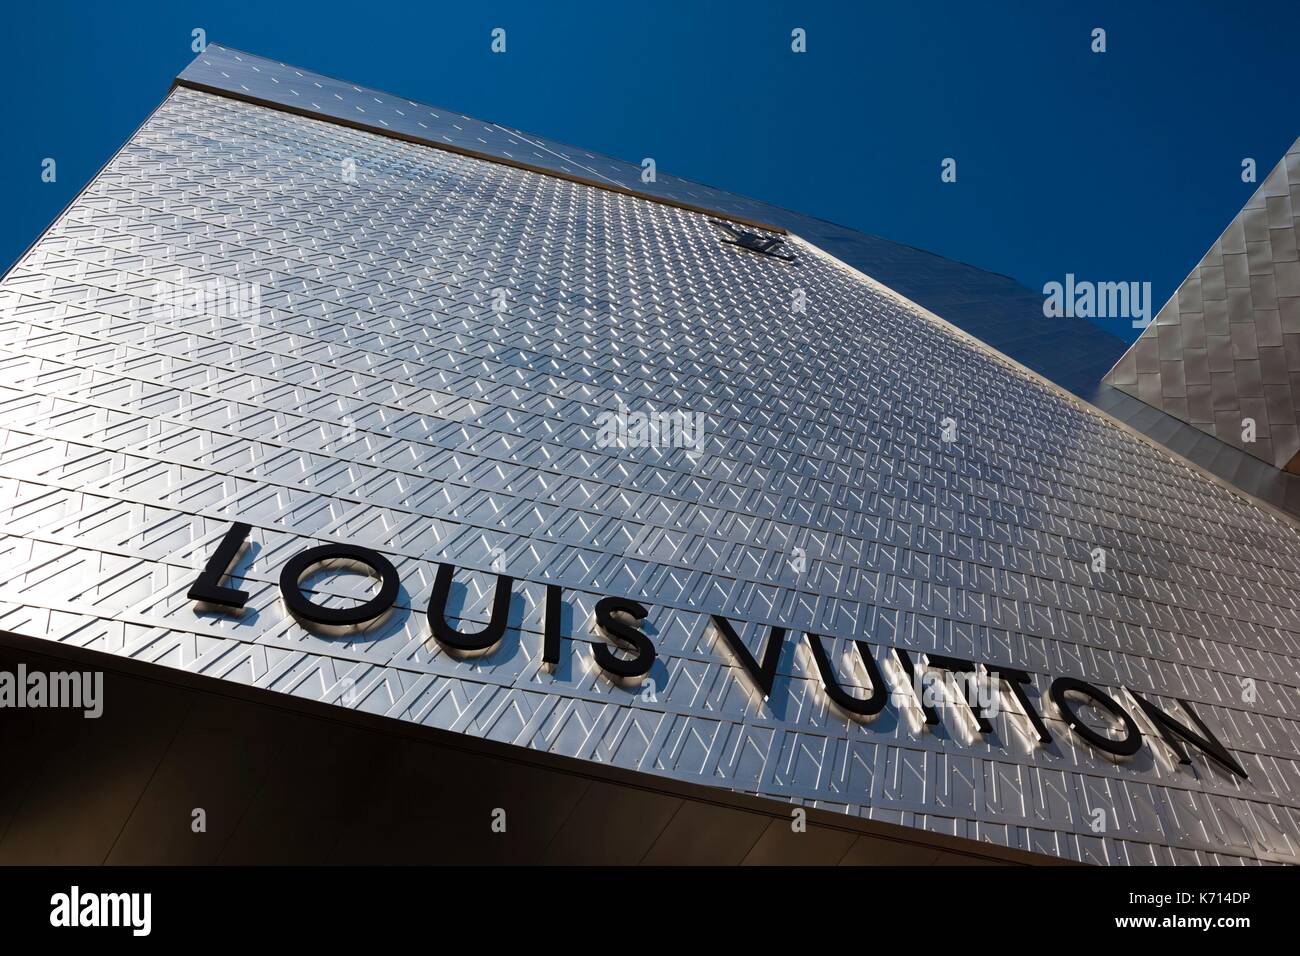 Louis vuitton shop at the crystal mall hi-res stock photography and images  - Alamy